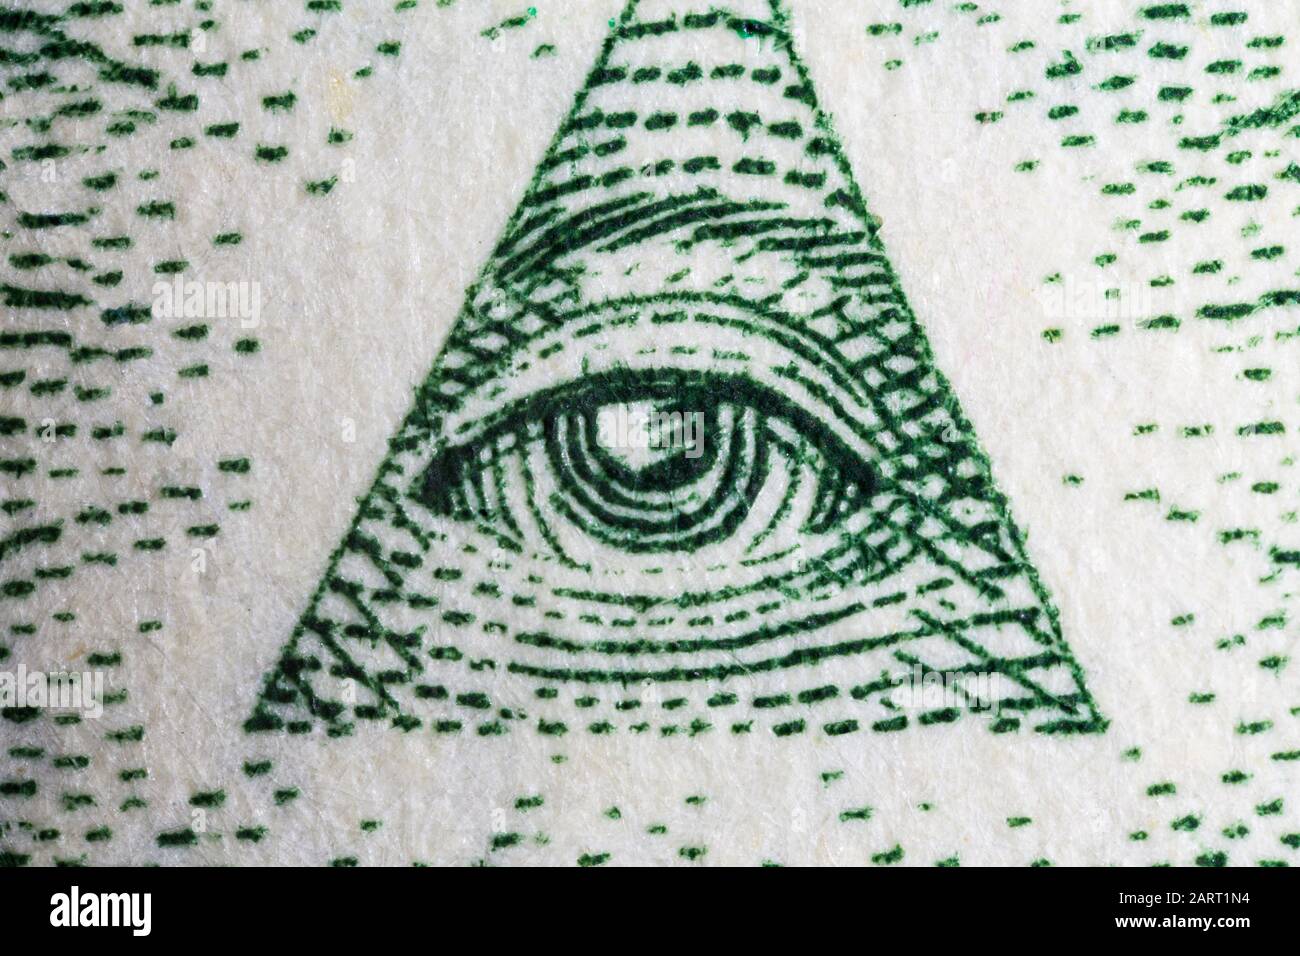 Macro close up photograph of the Eye of Providence on the US one dollar bill. Stock Photo